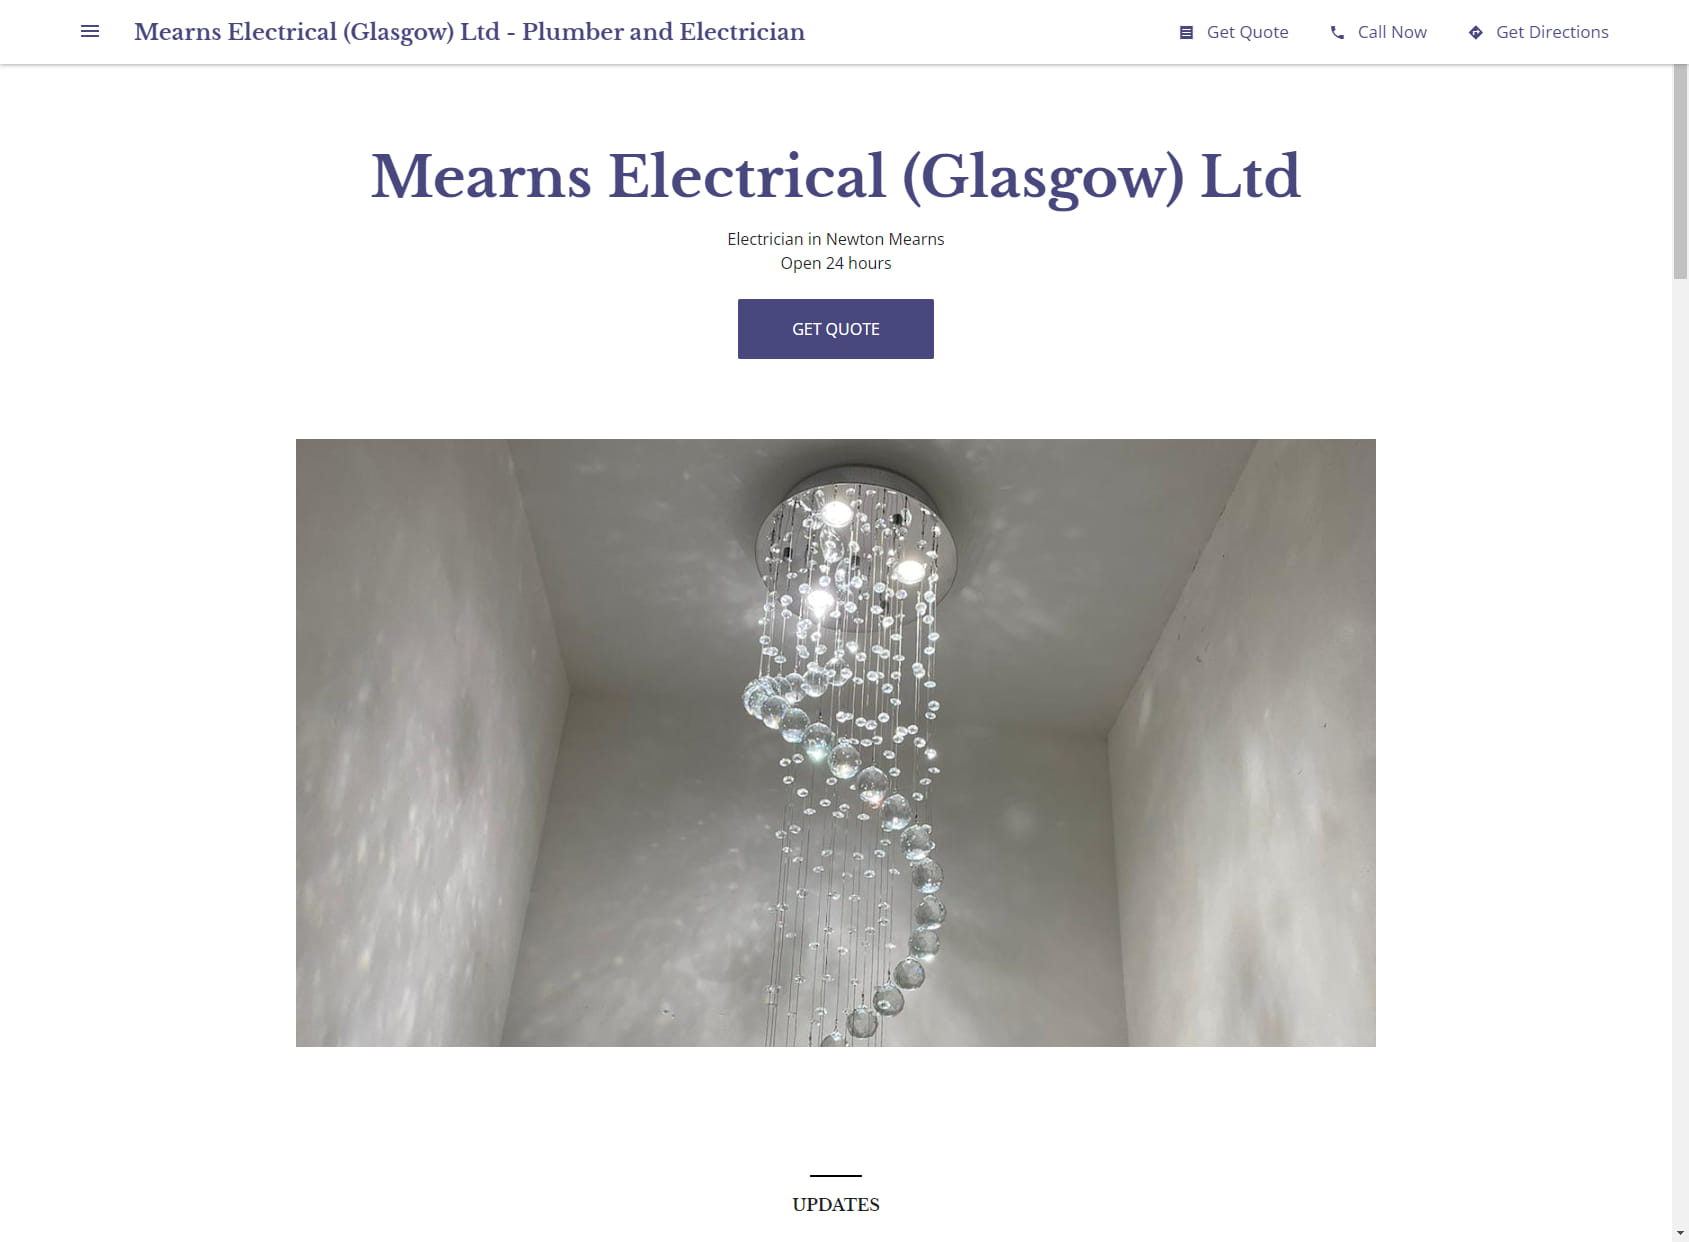 Mearns Electrical (Glasgow) Ltd - Plumber and Electrician